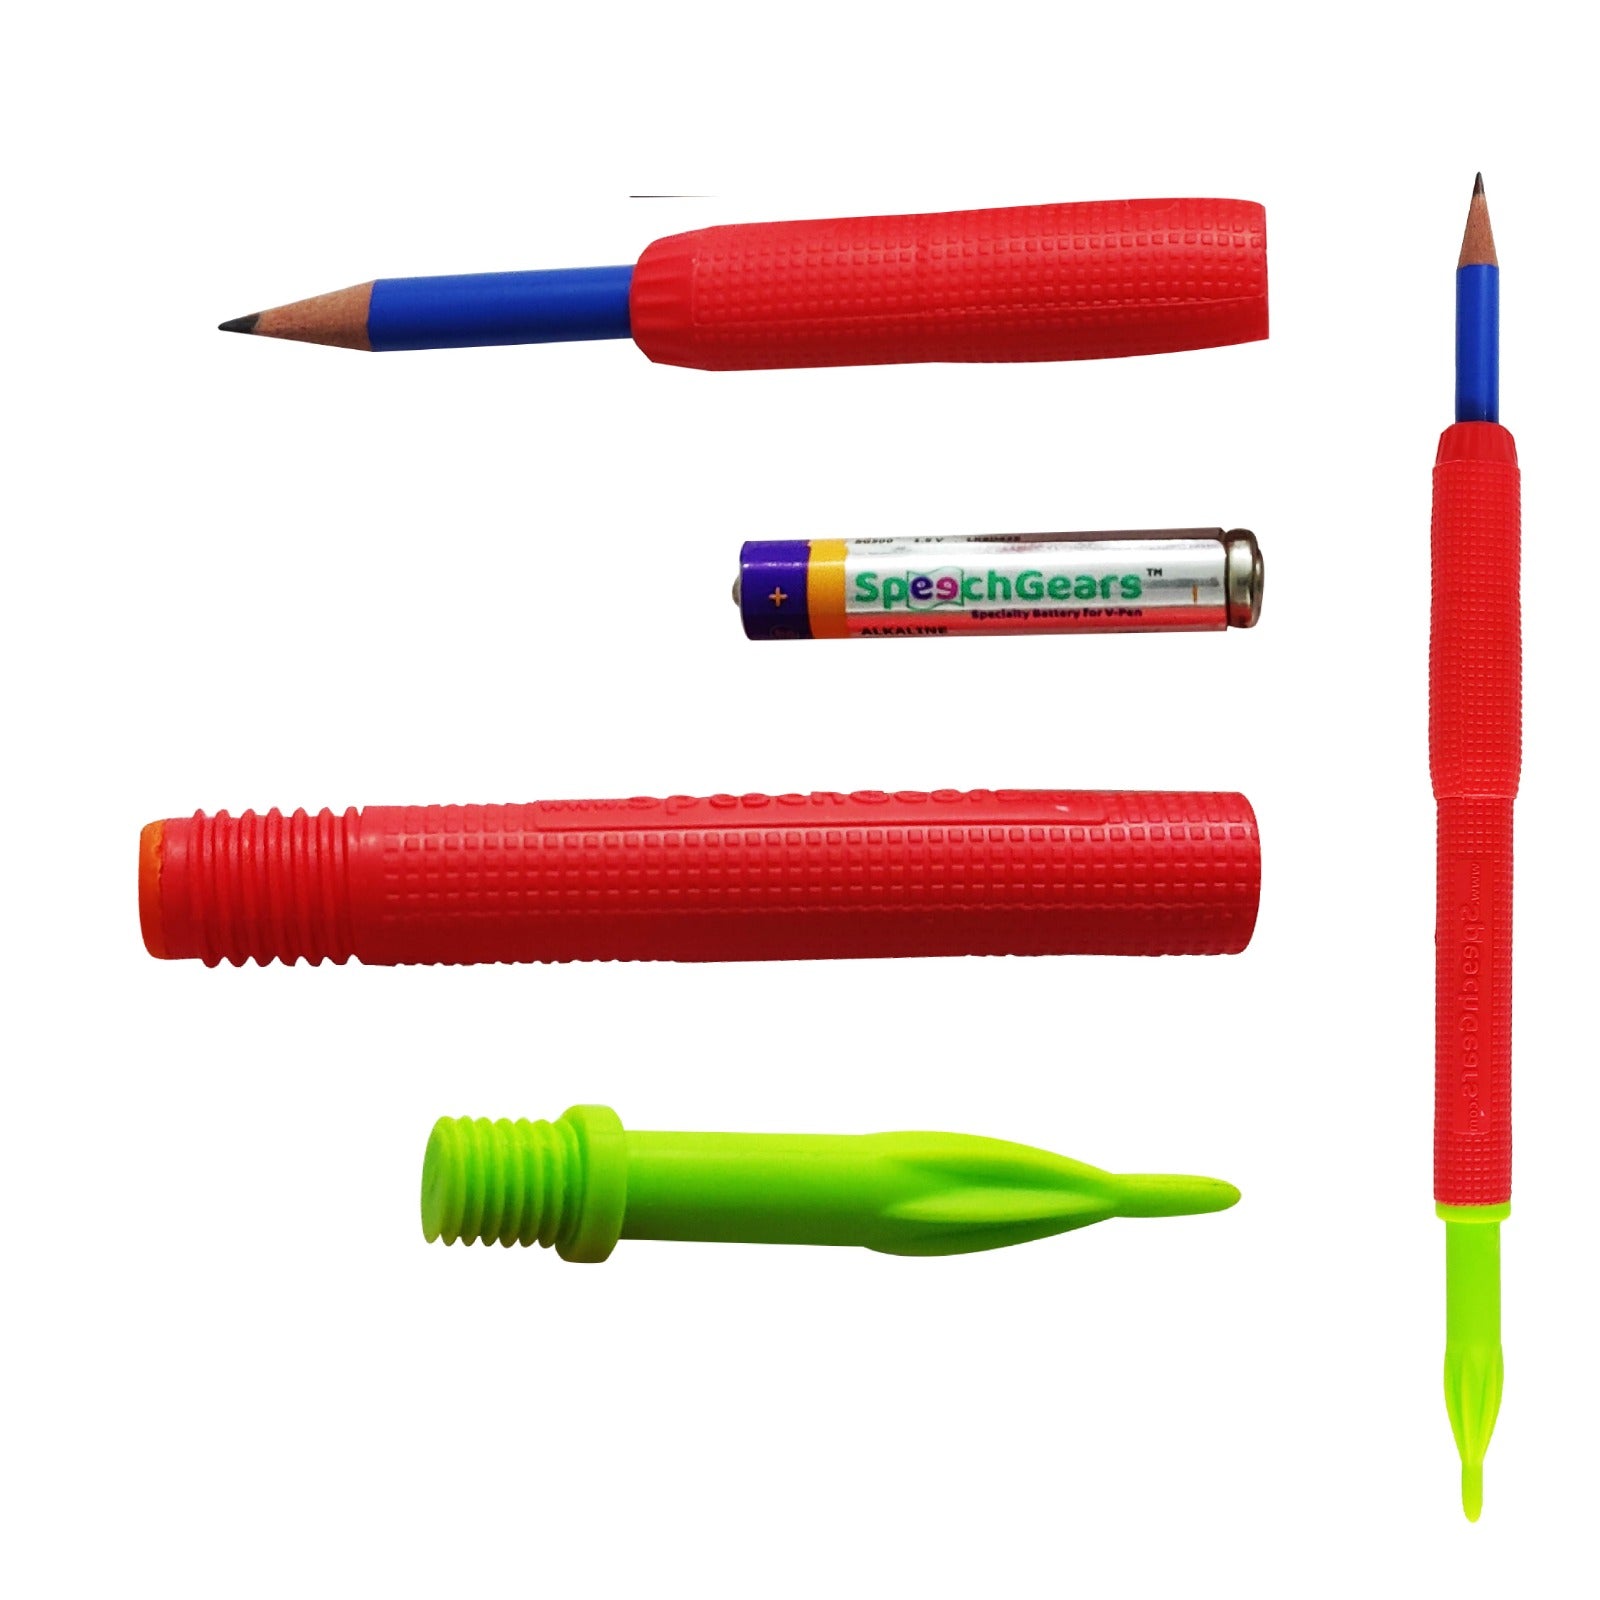 V-Pen with Pointed-Tip